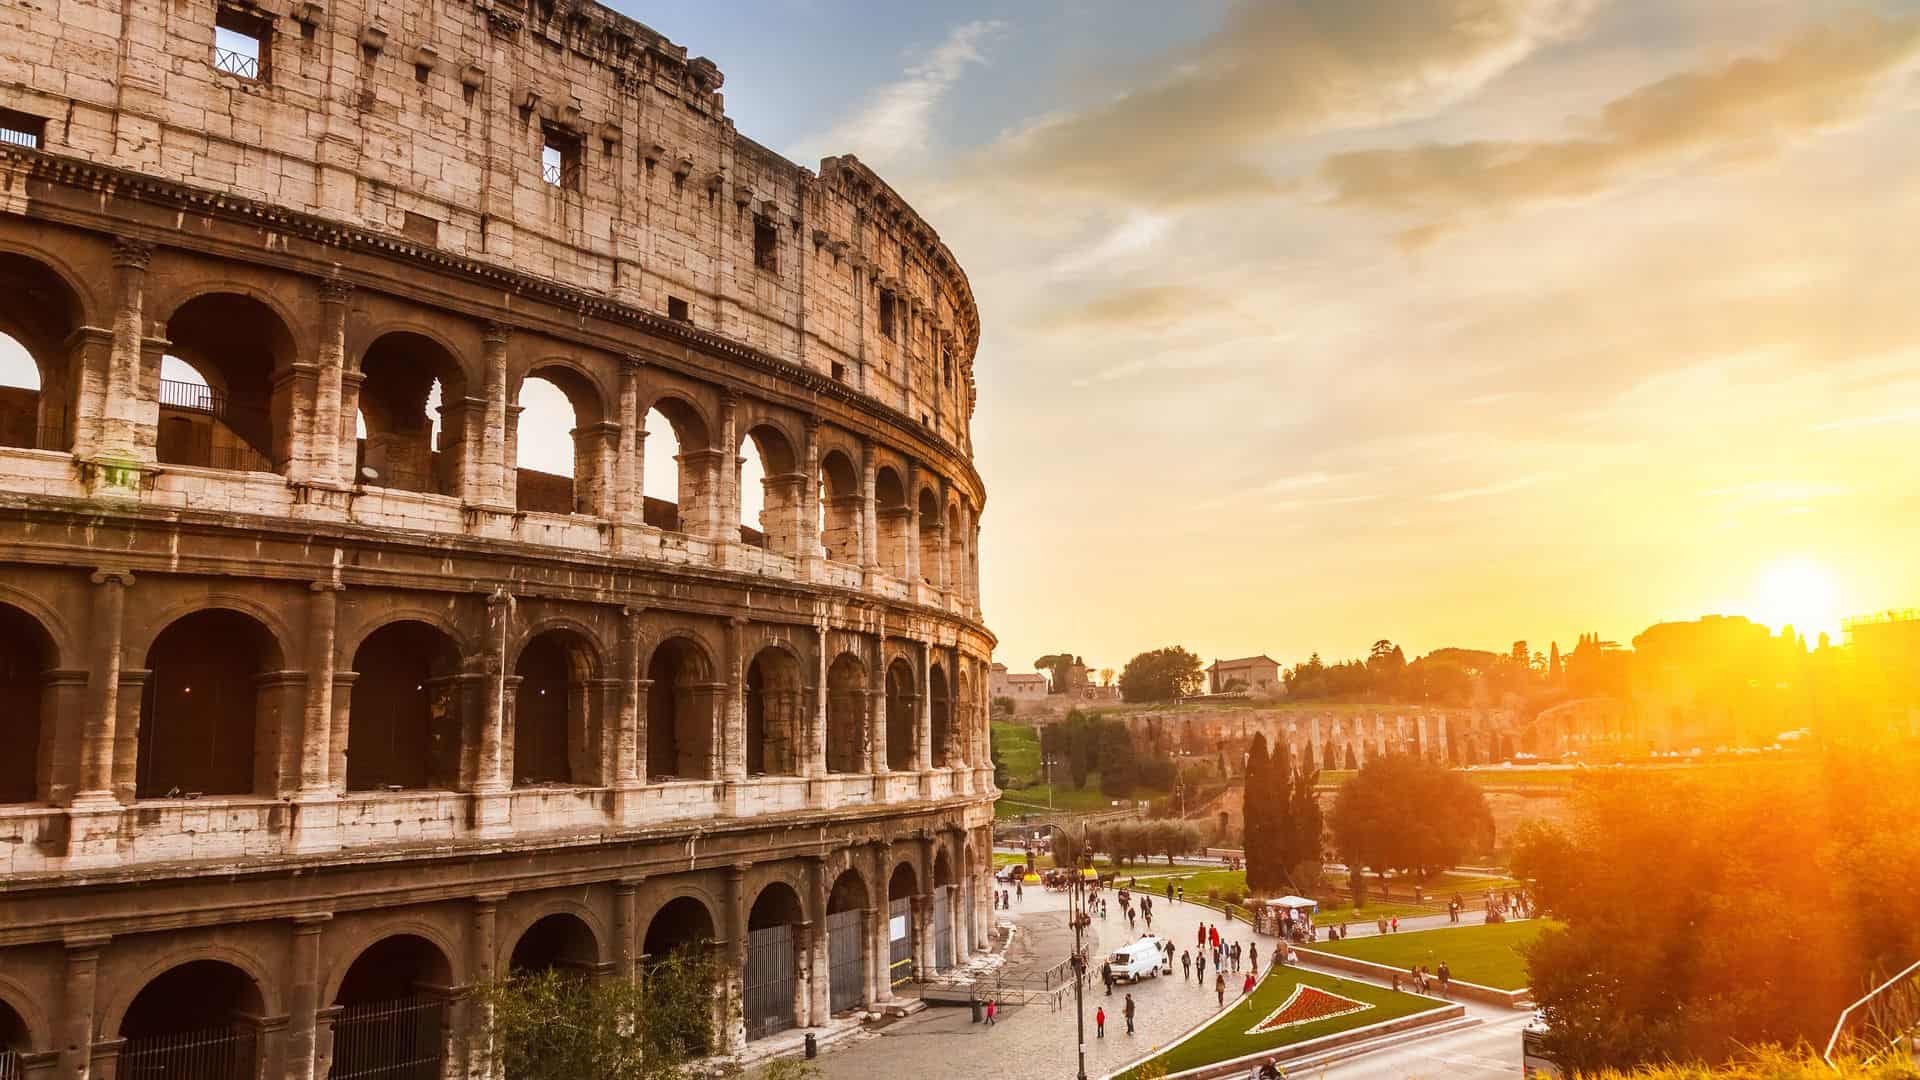 The Roman Colosseum at sunset